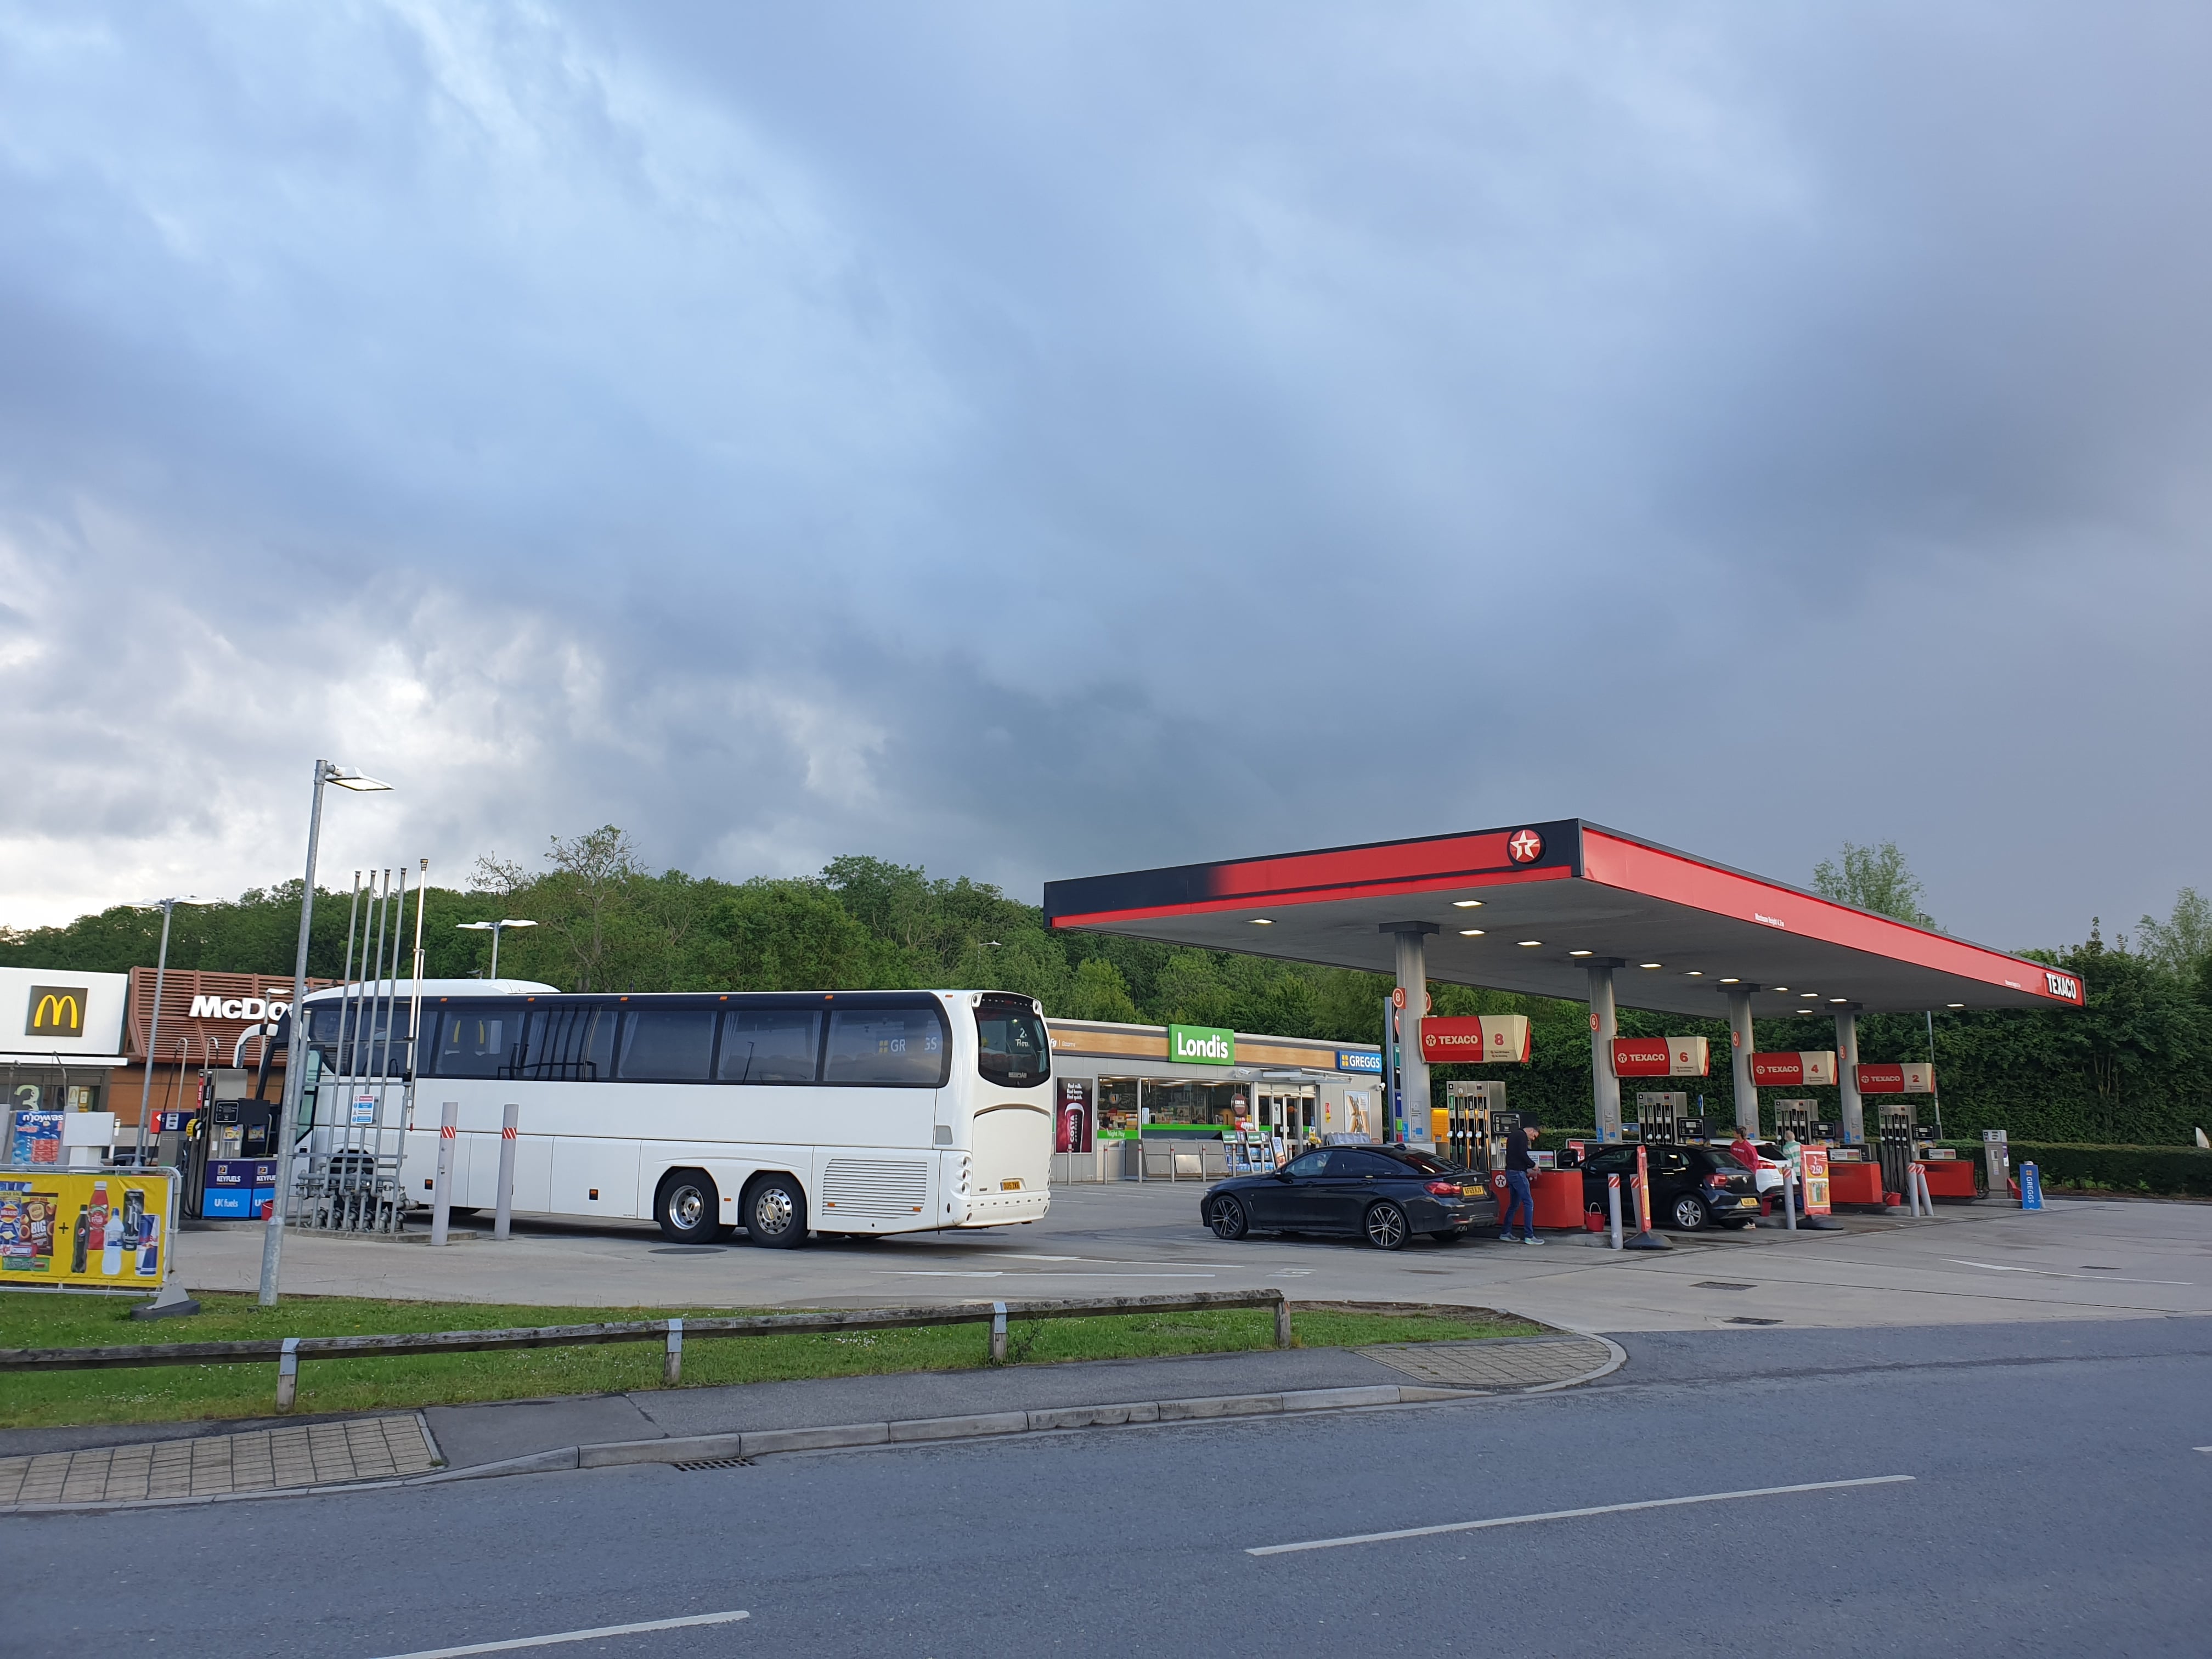 coach at a refuelling station